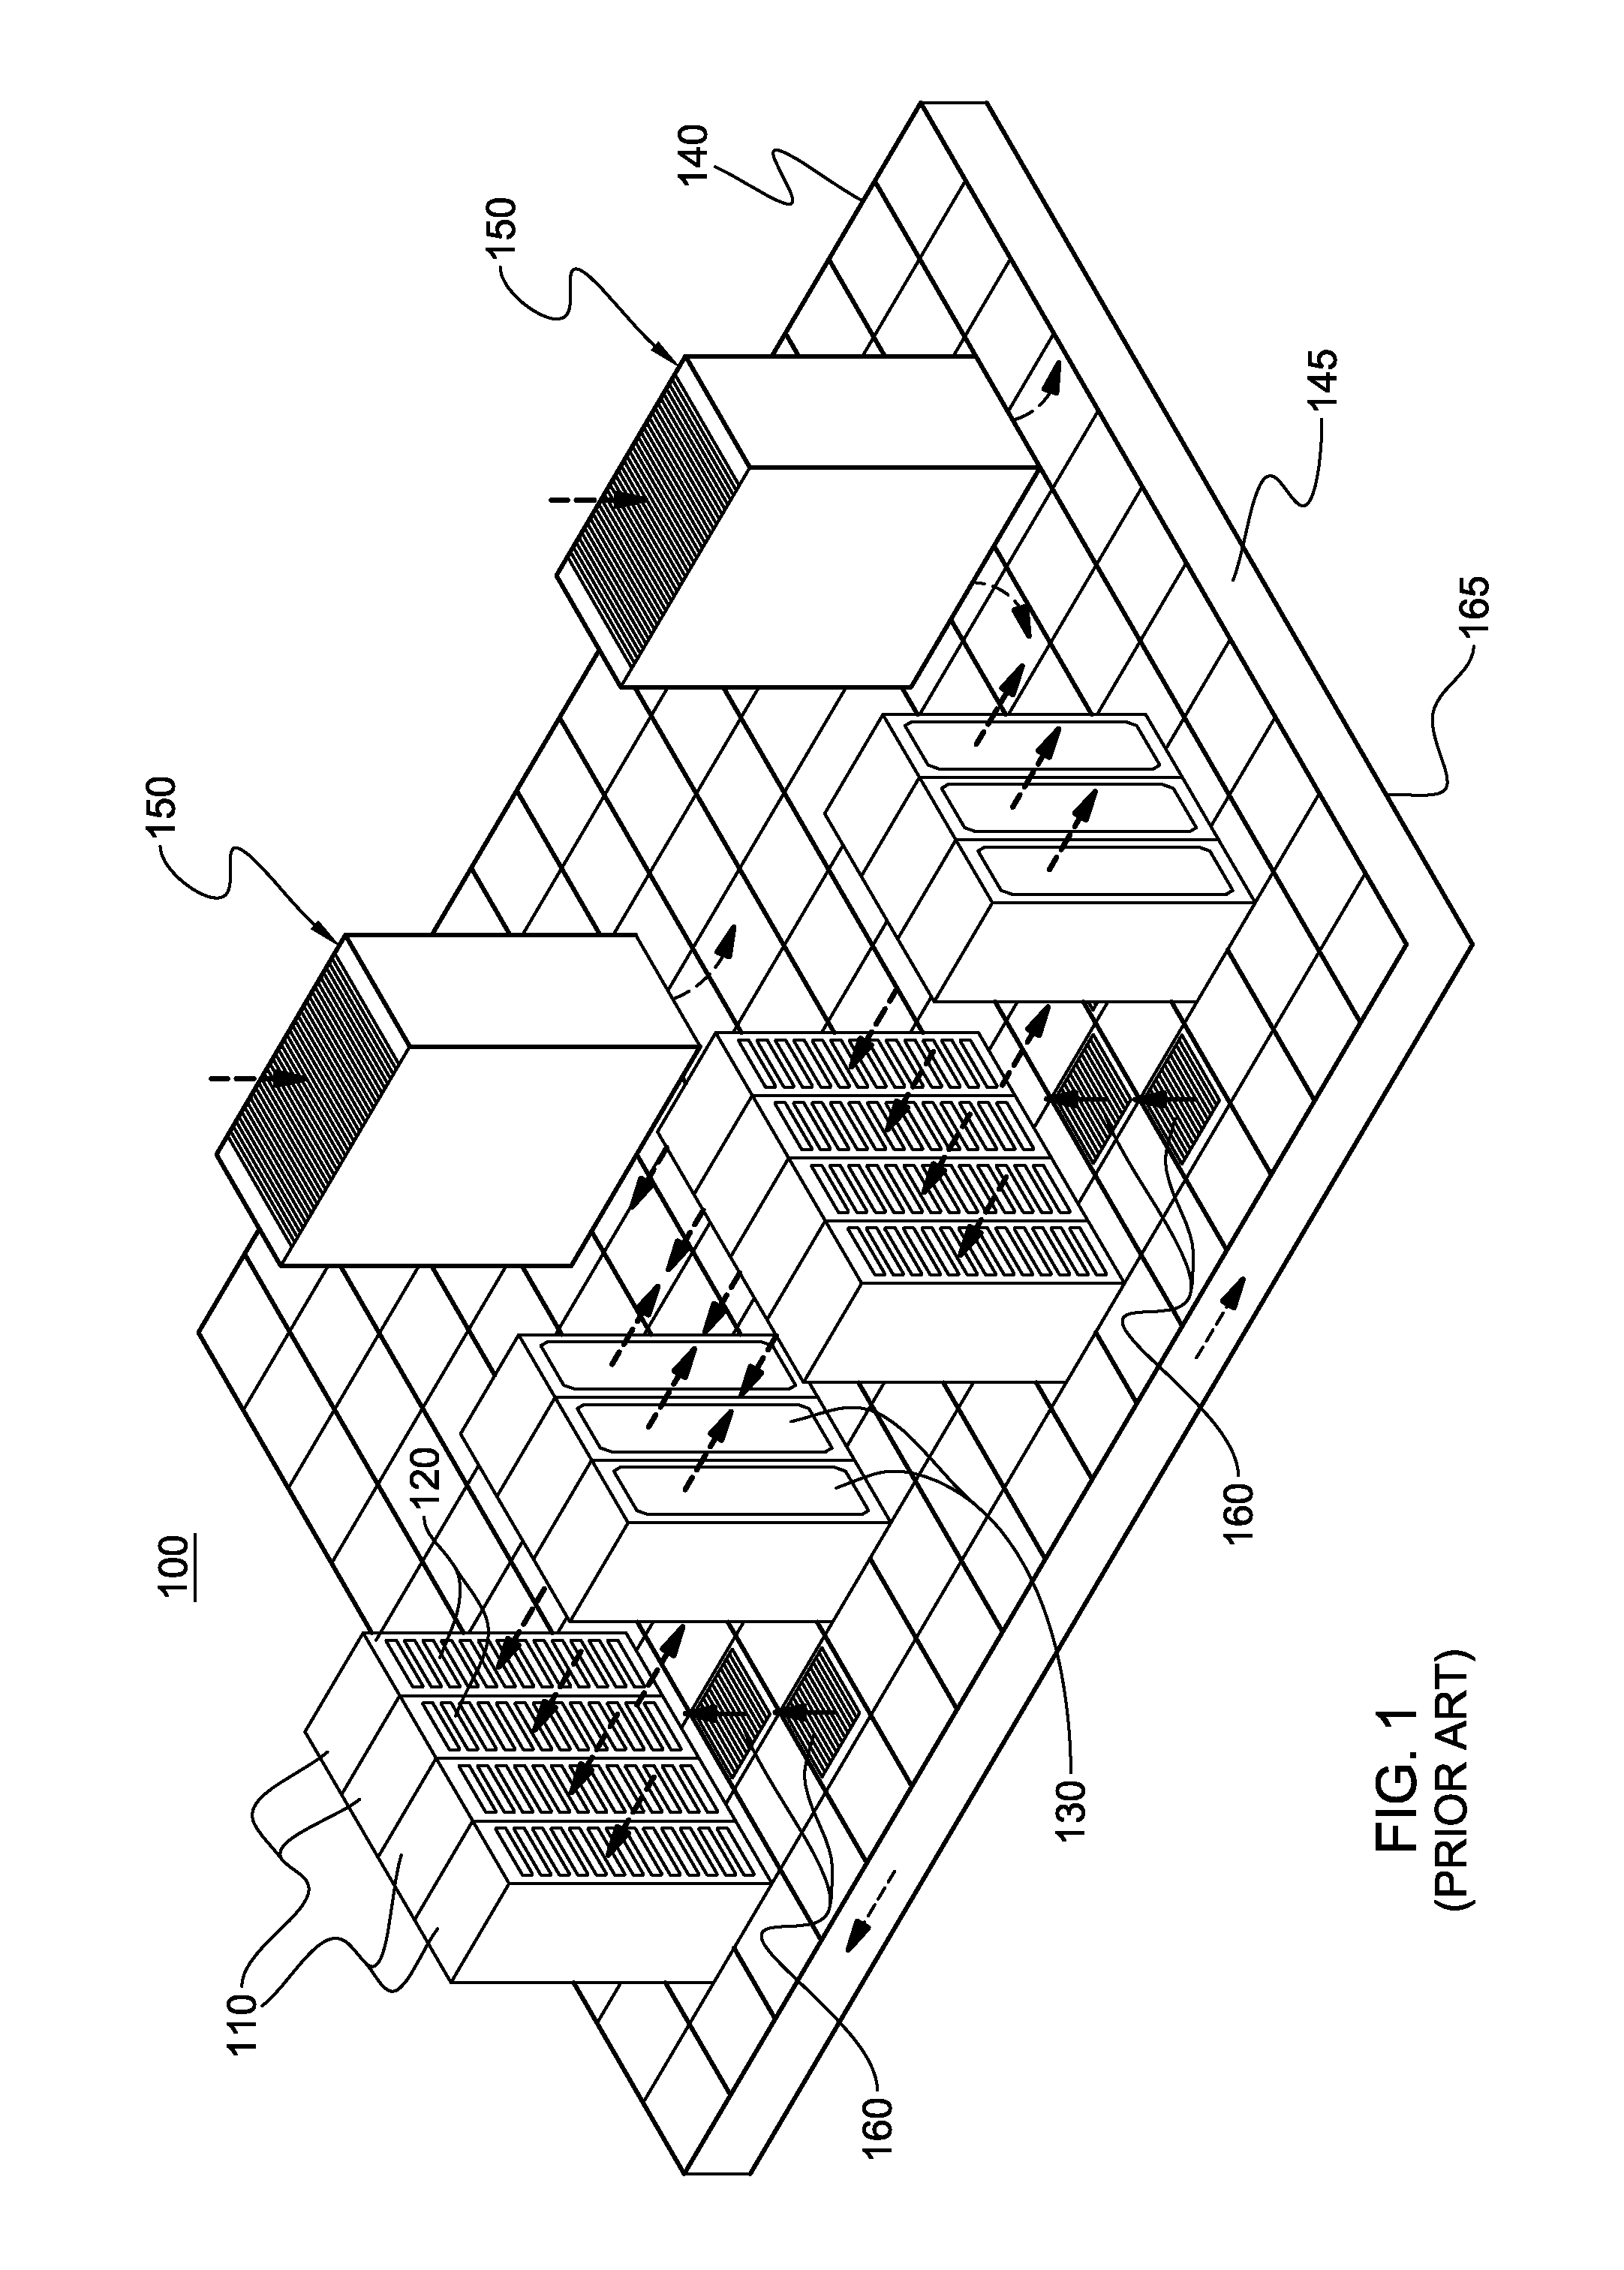 Apparatus and method with forced coolant vapor movement for facilitating two-phase cooling of an electronic device